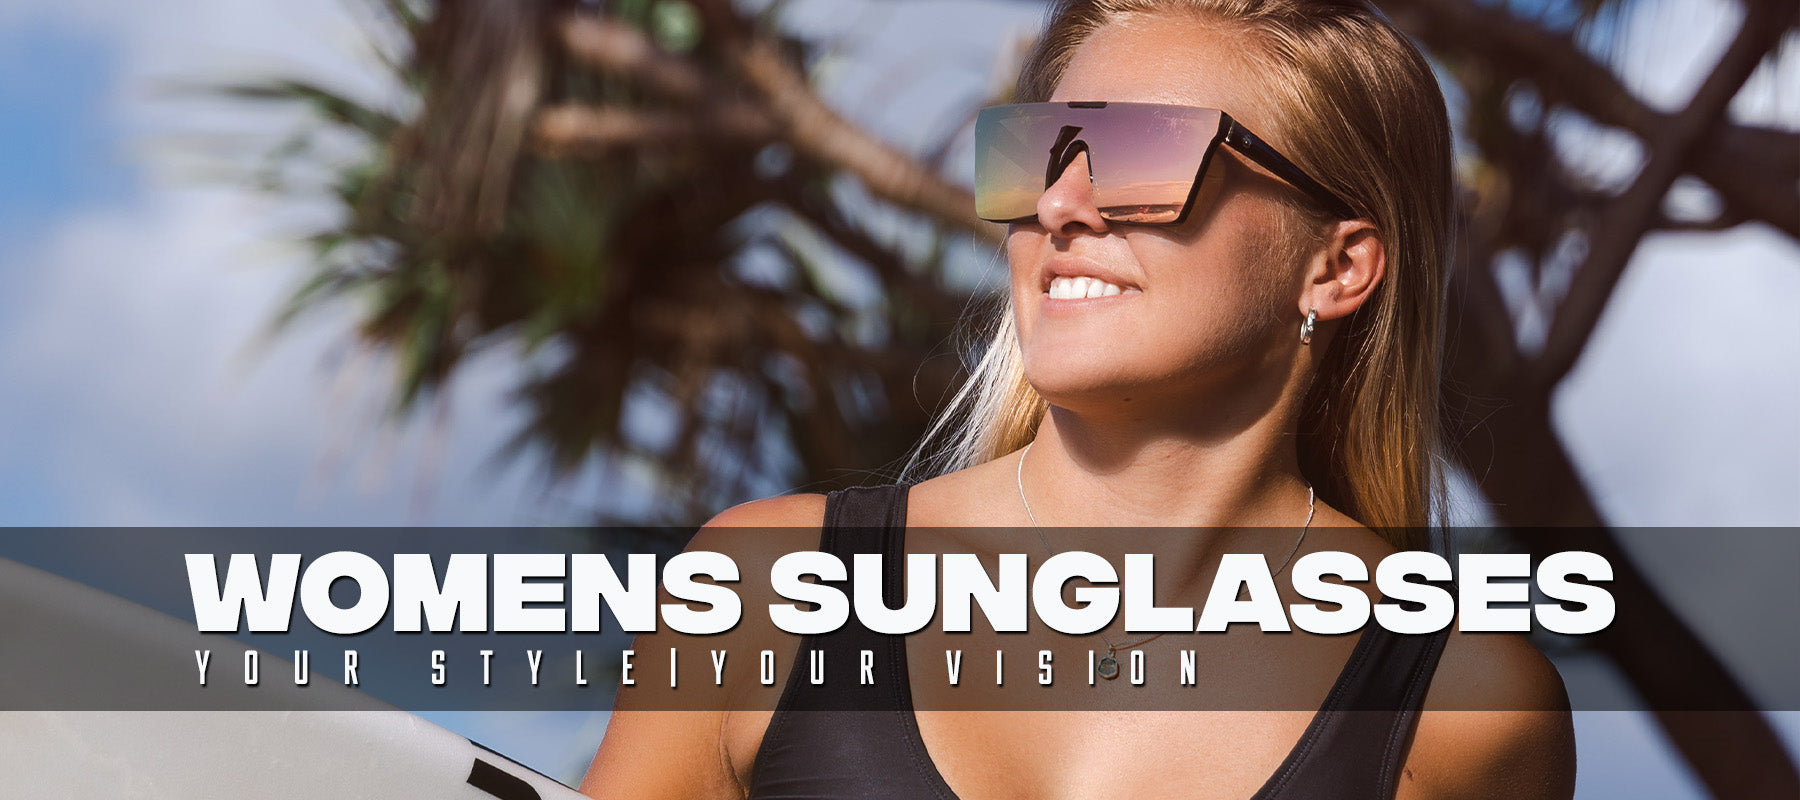 Shop Official Heat Wave Visual Australia. Free Same Day Shipping. SHOP LADIES SUNGLASSES. 